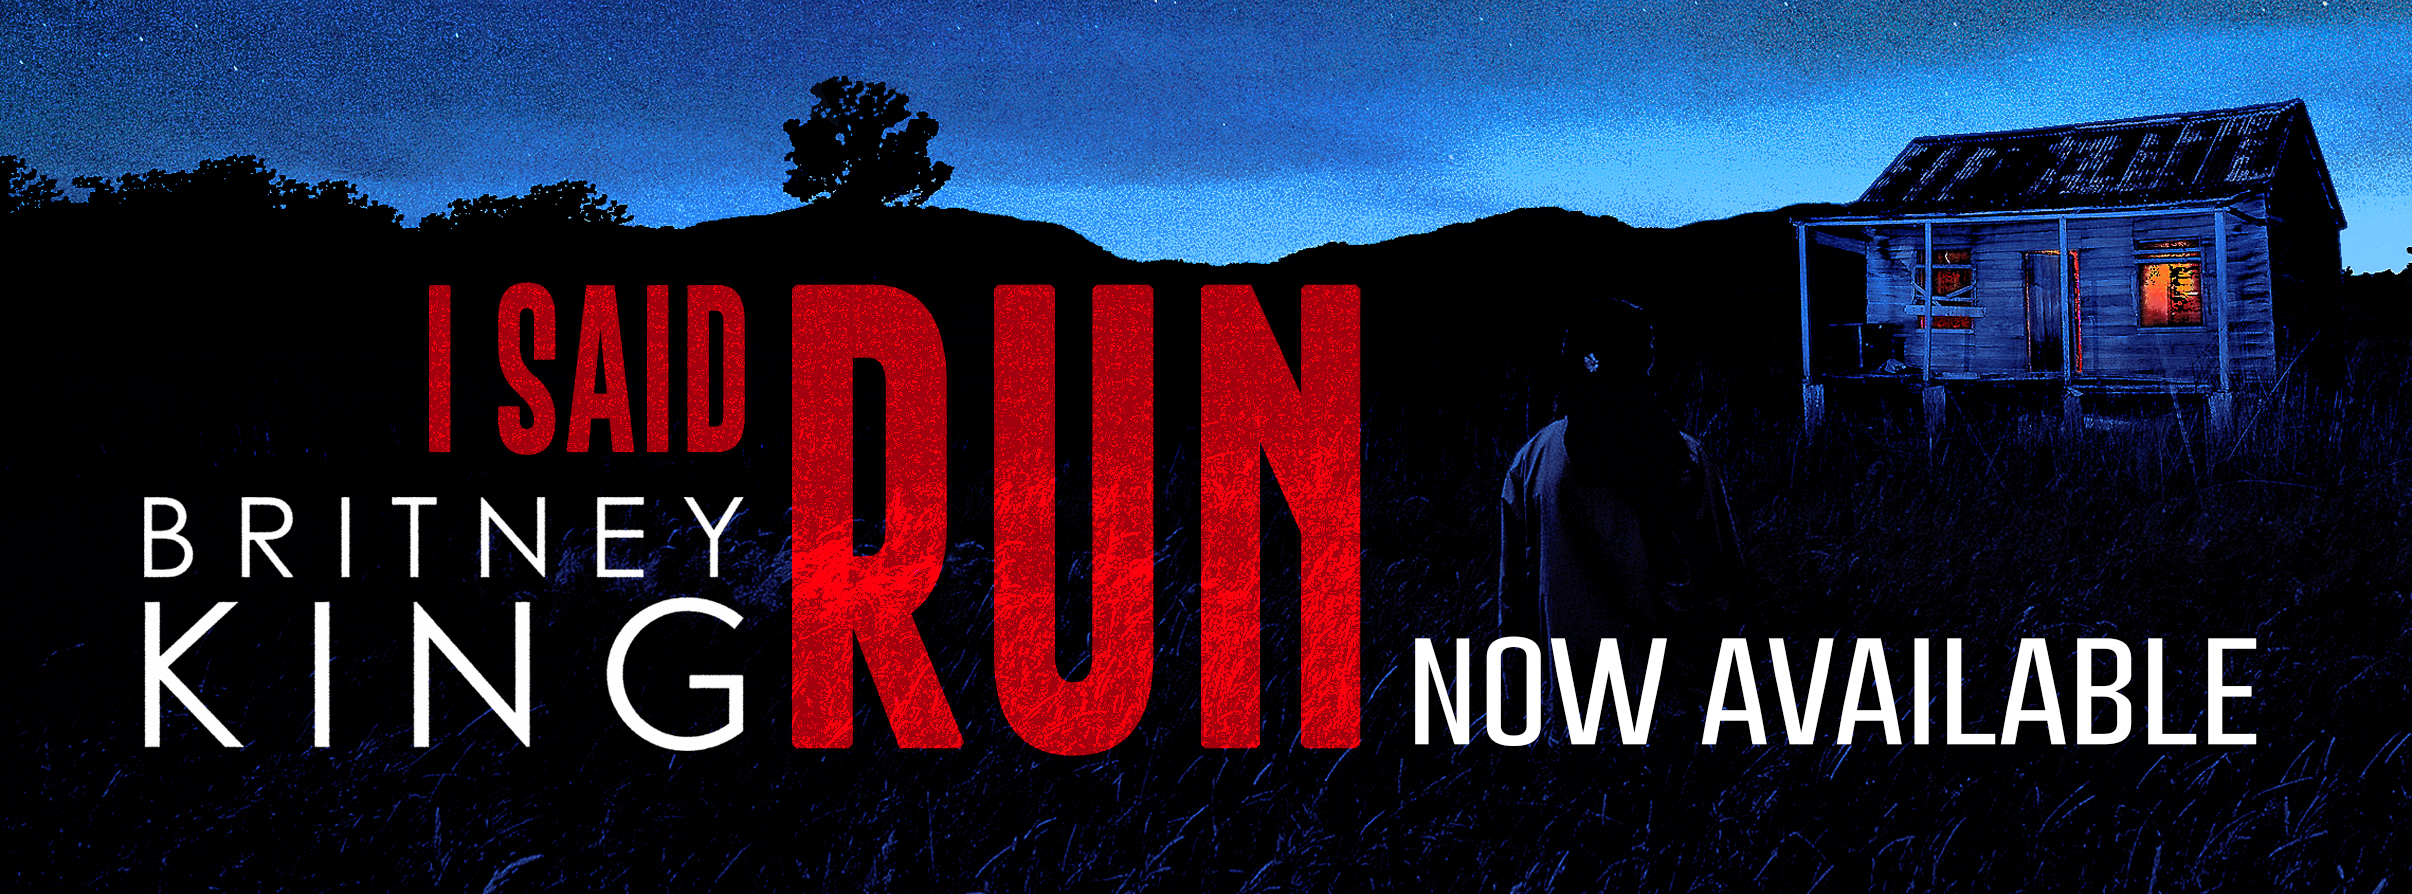 I-SAID-RUN-Now-Available-banner